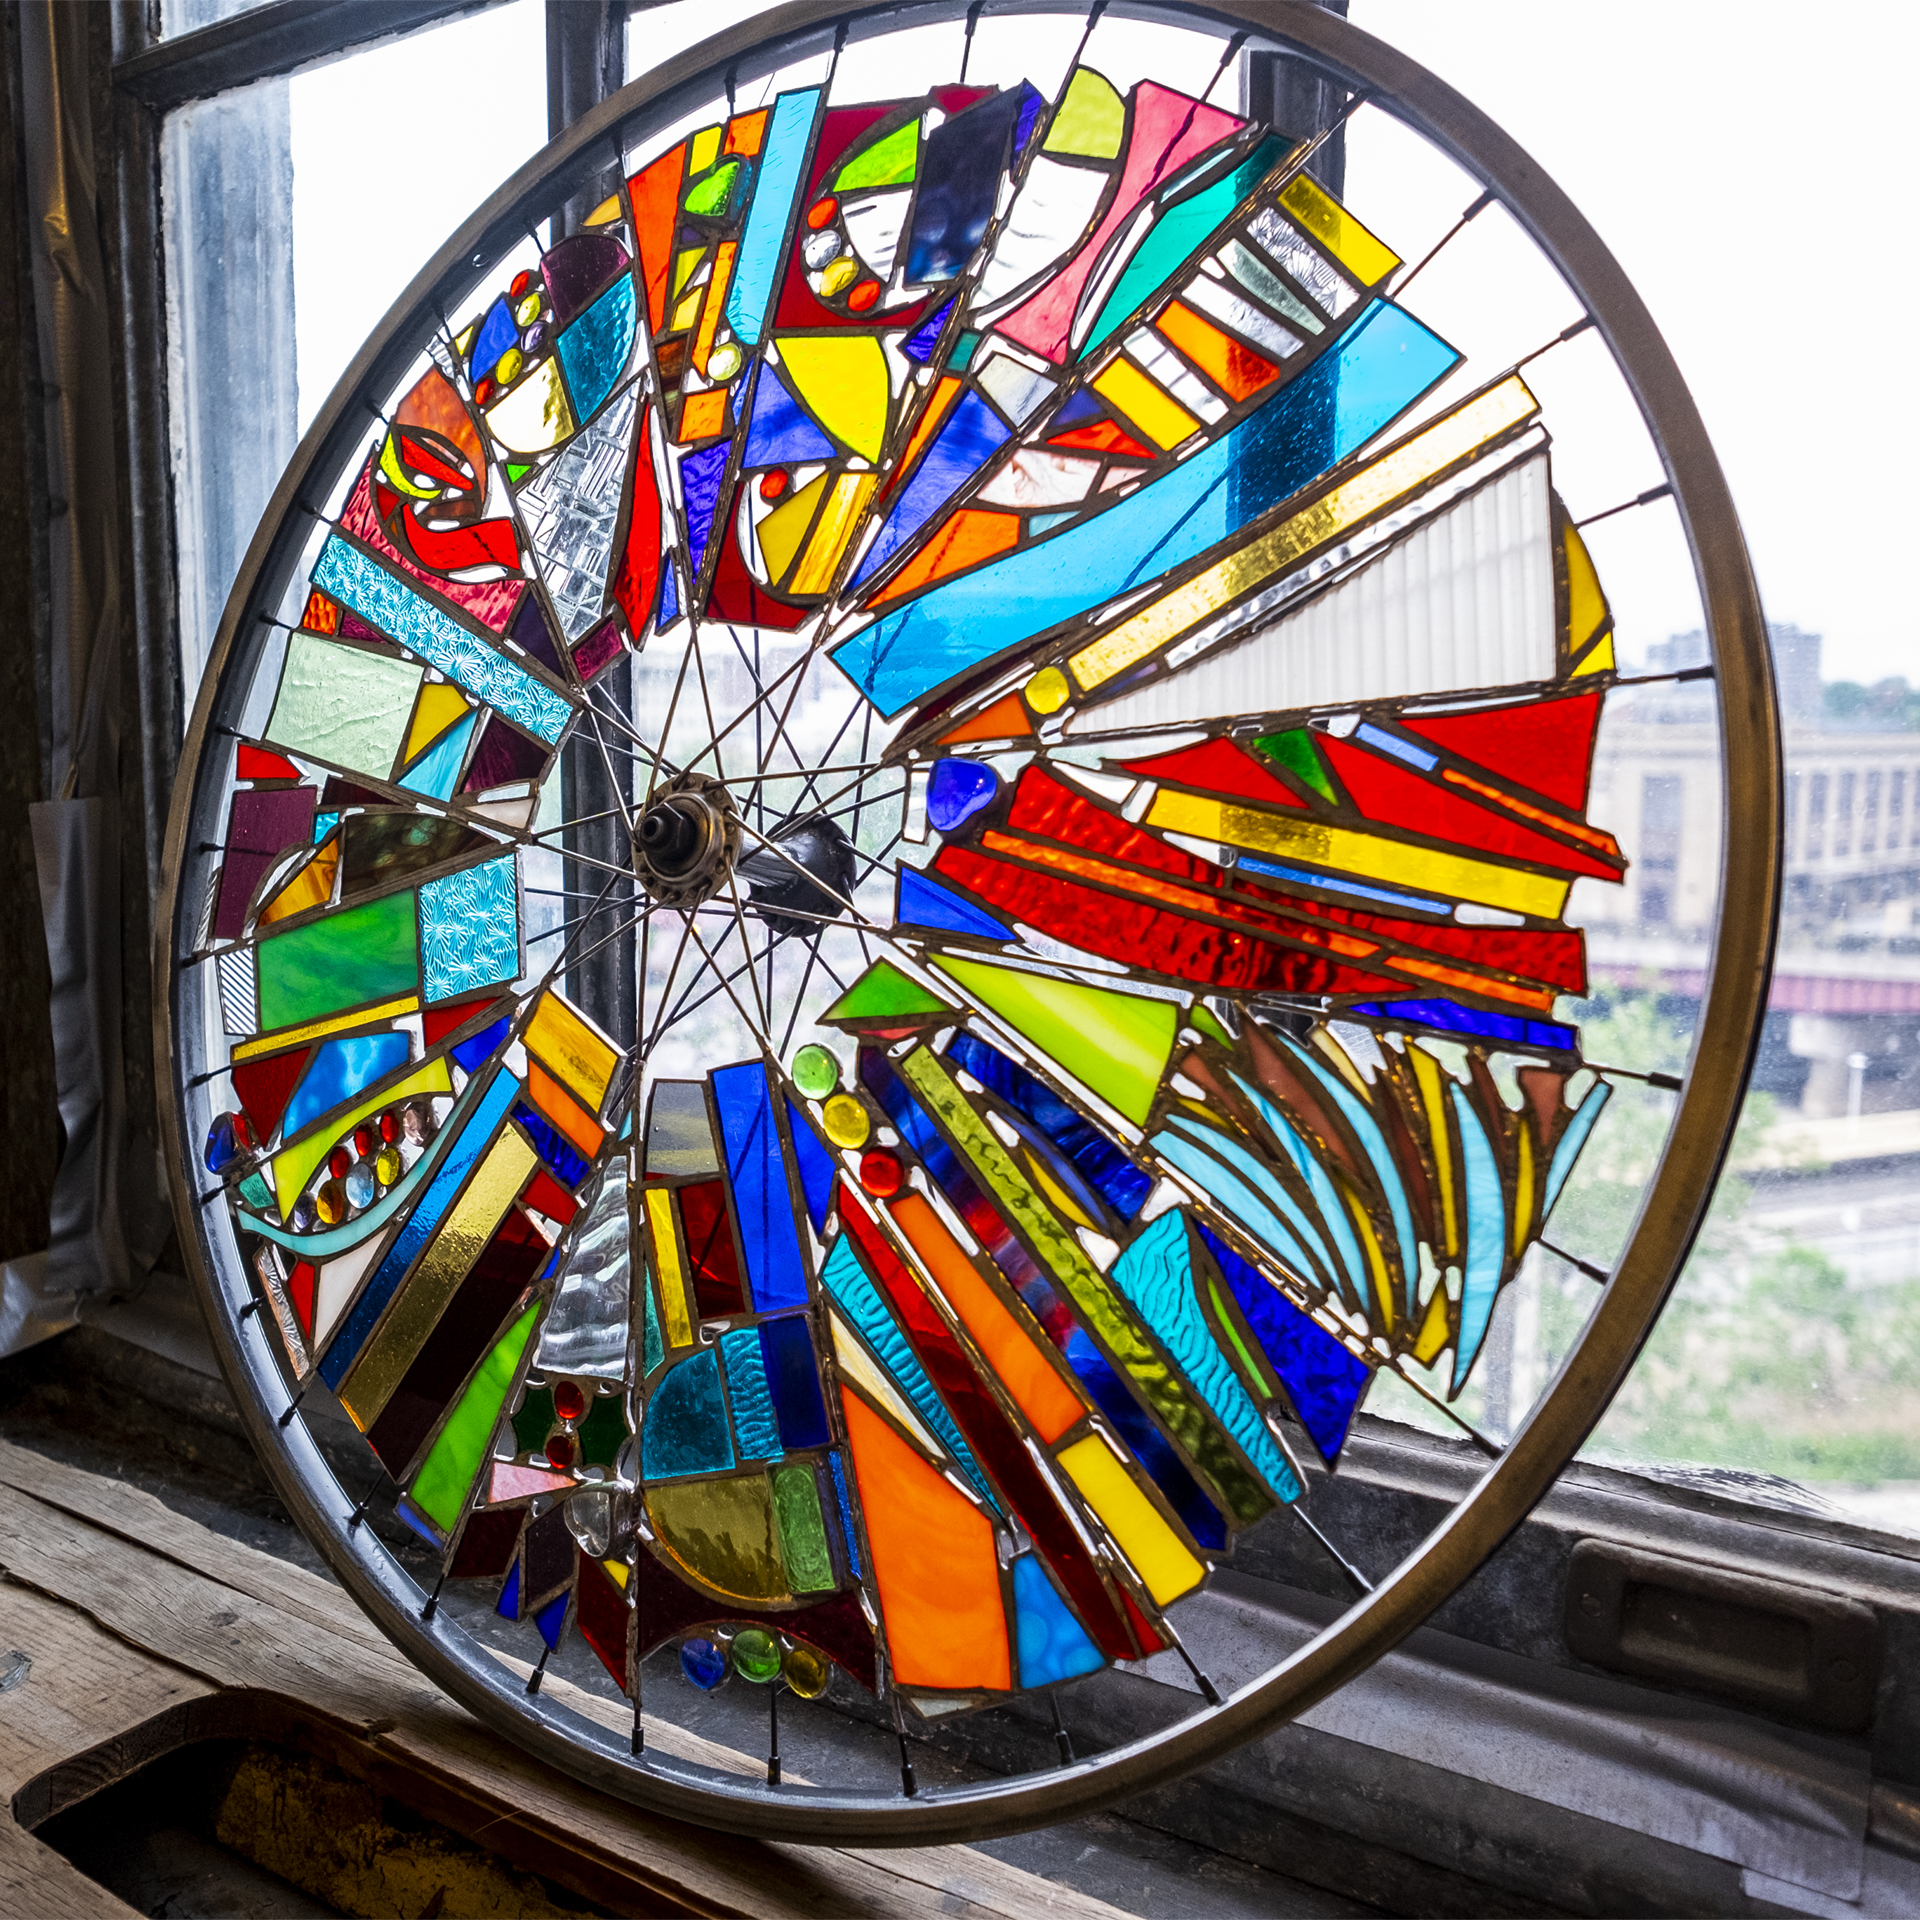 Bicycle wheel art with colored glass inserted between spokes